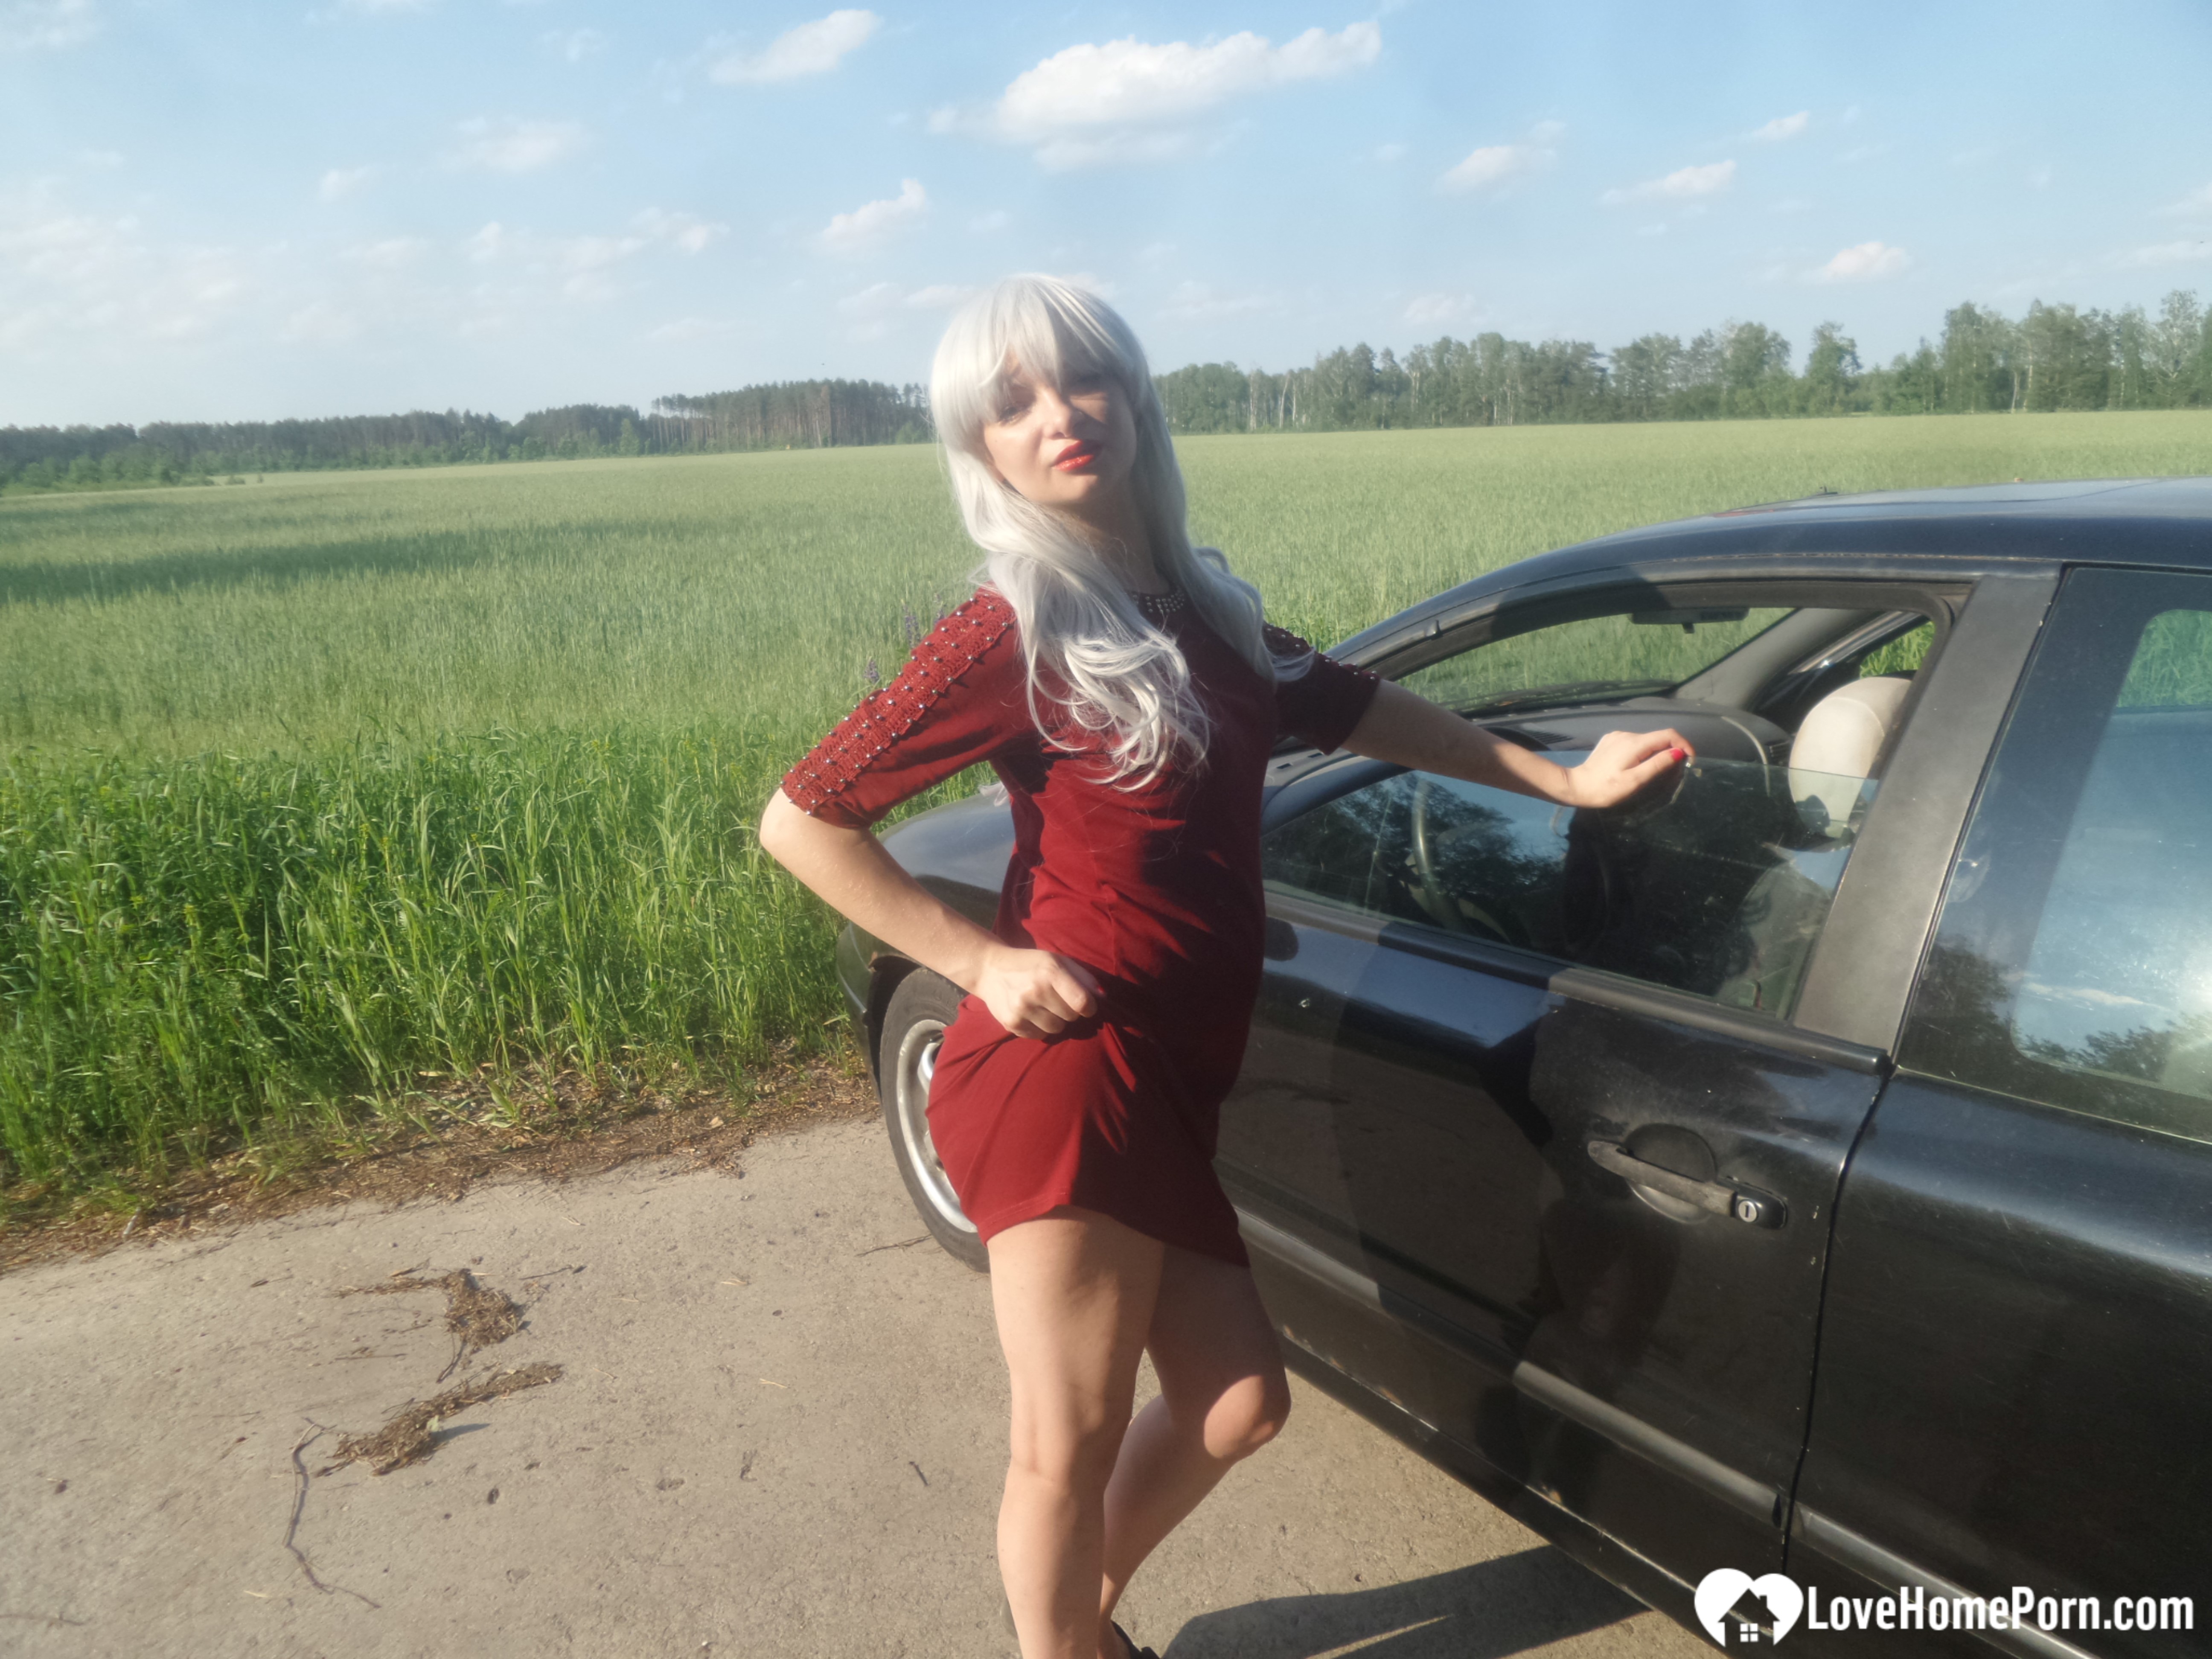 Beautiful blonde wants you in her car